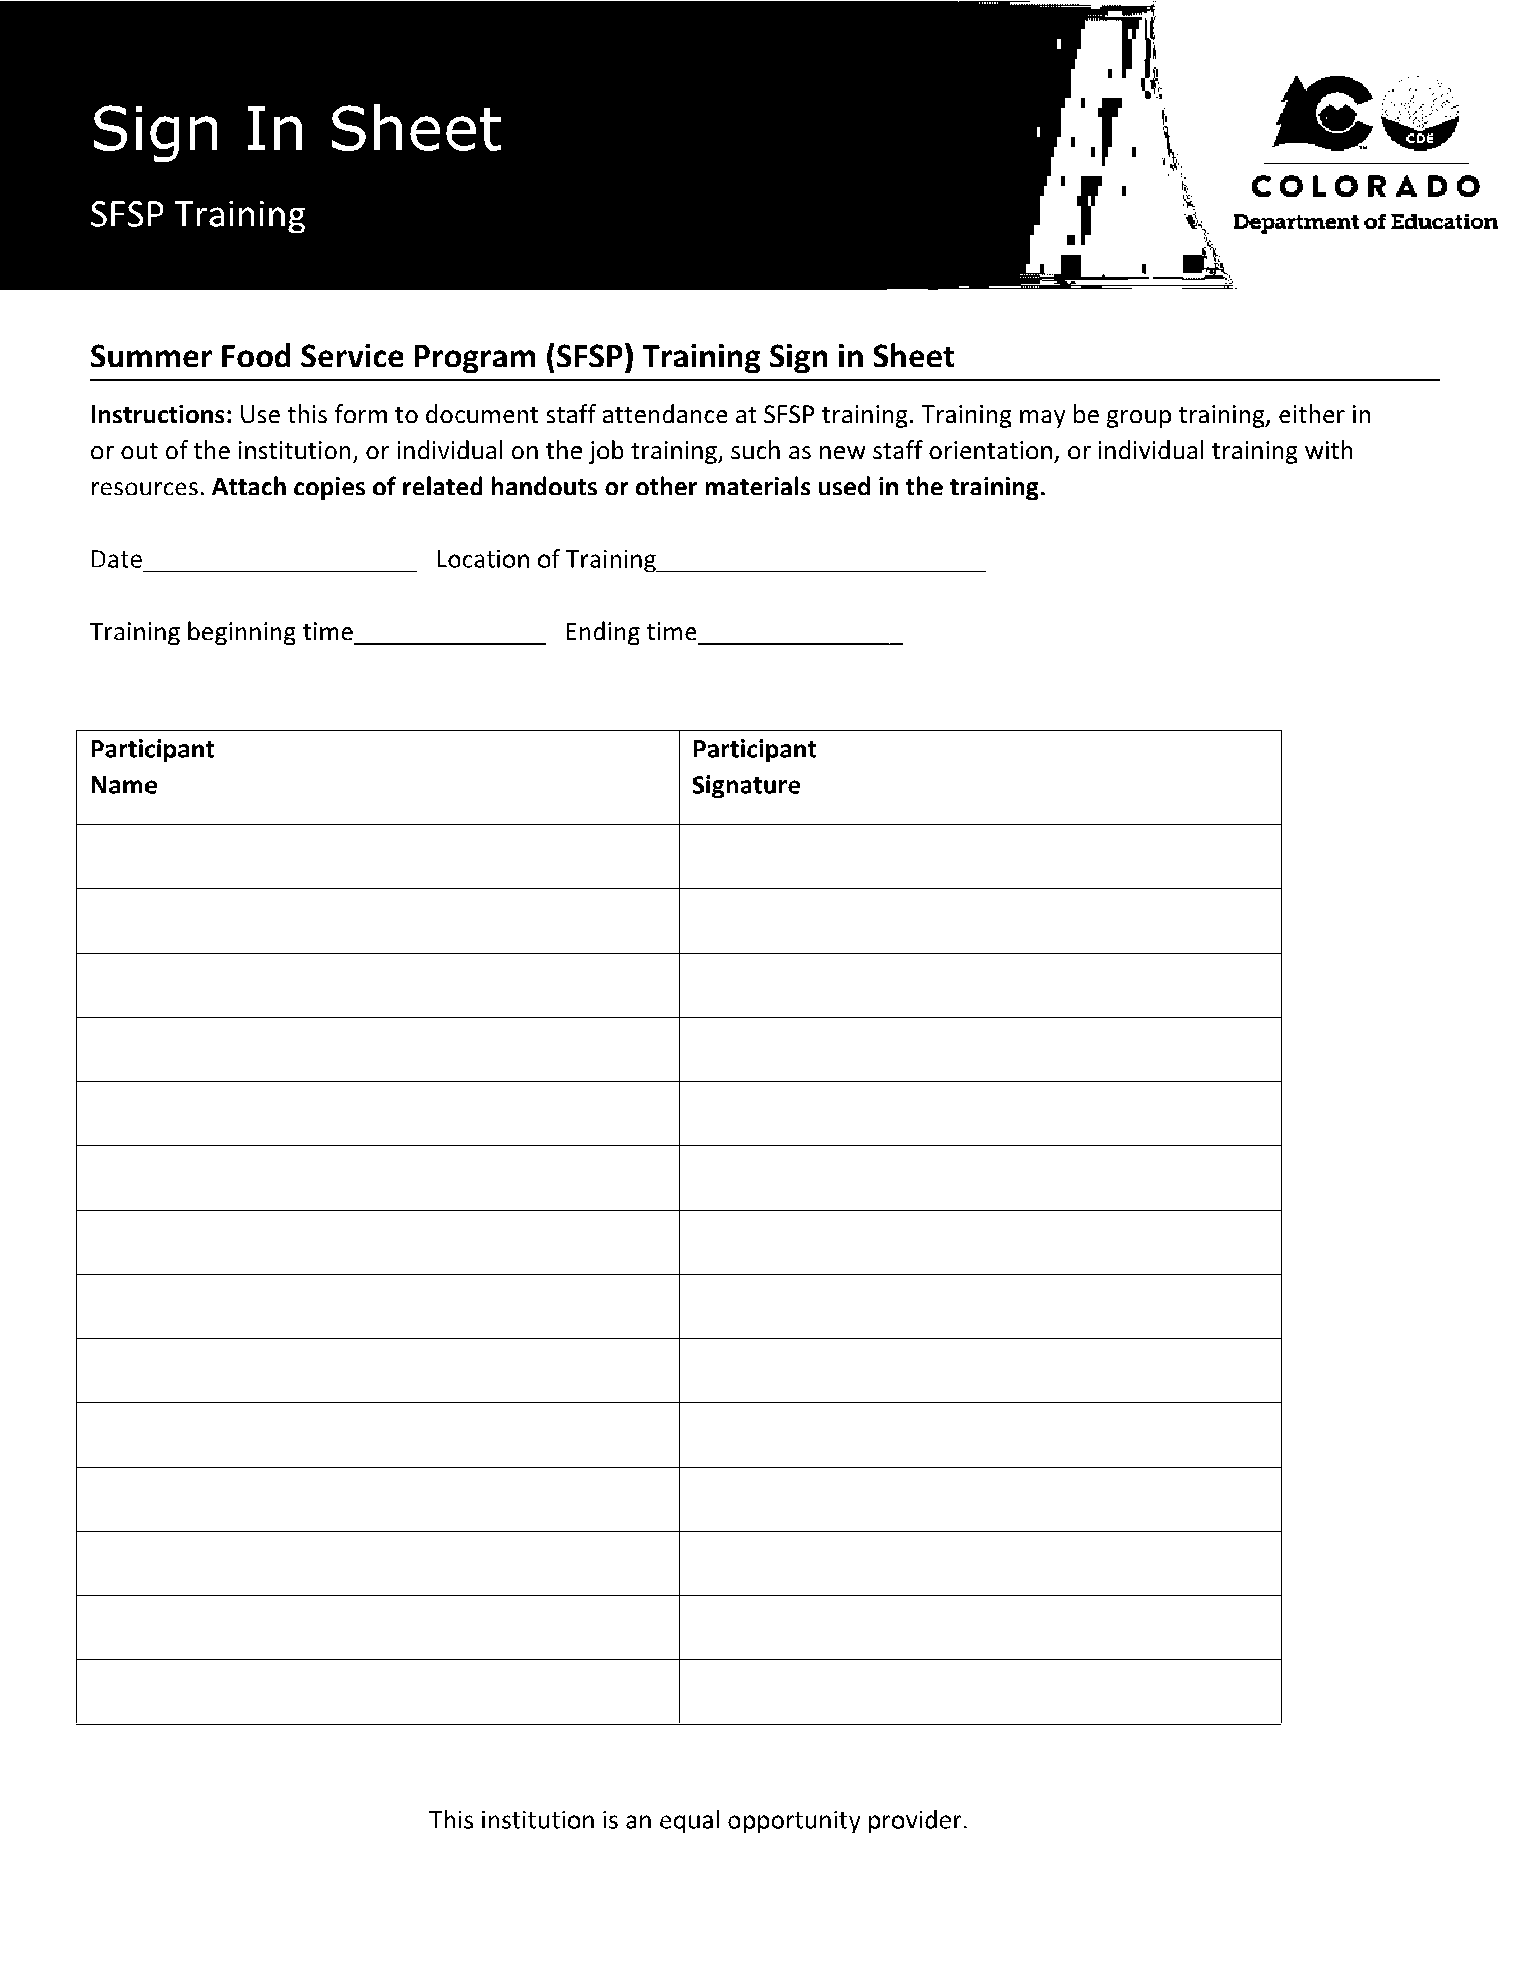 Training Sign-in Sheet